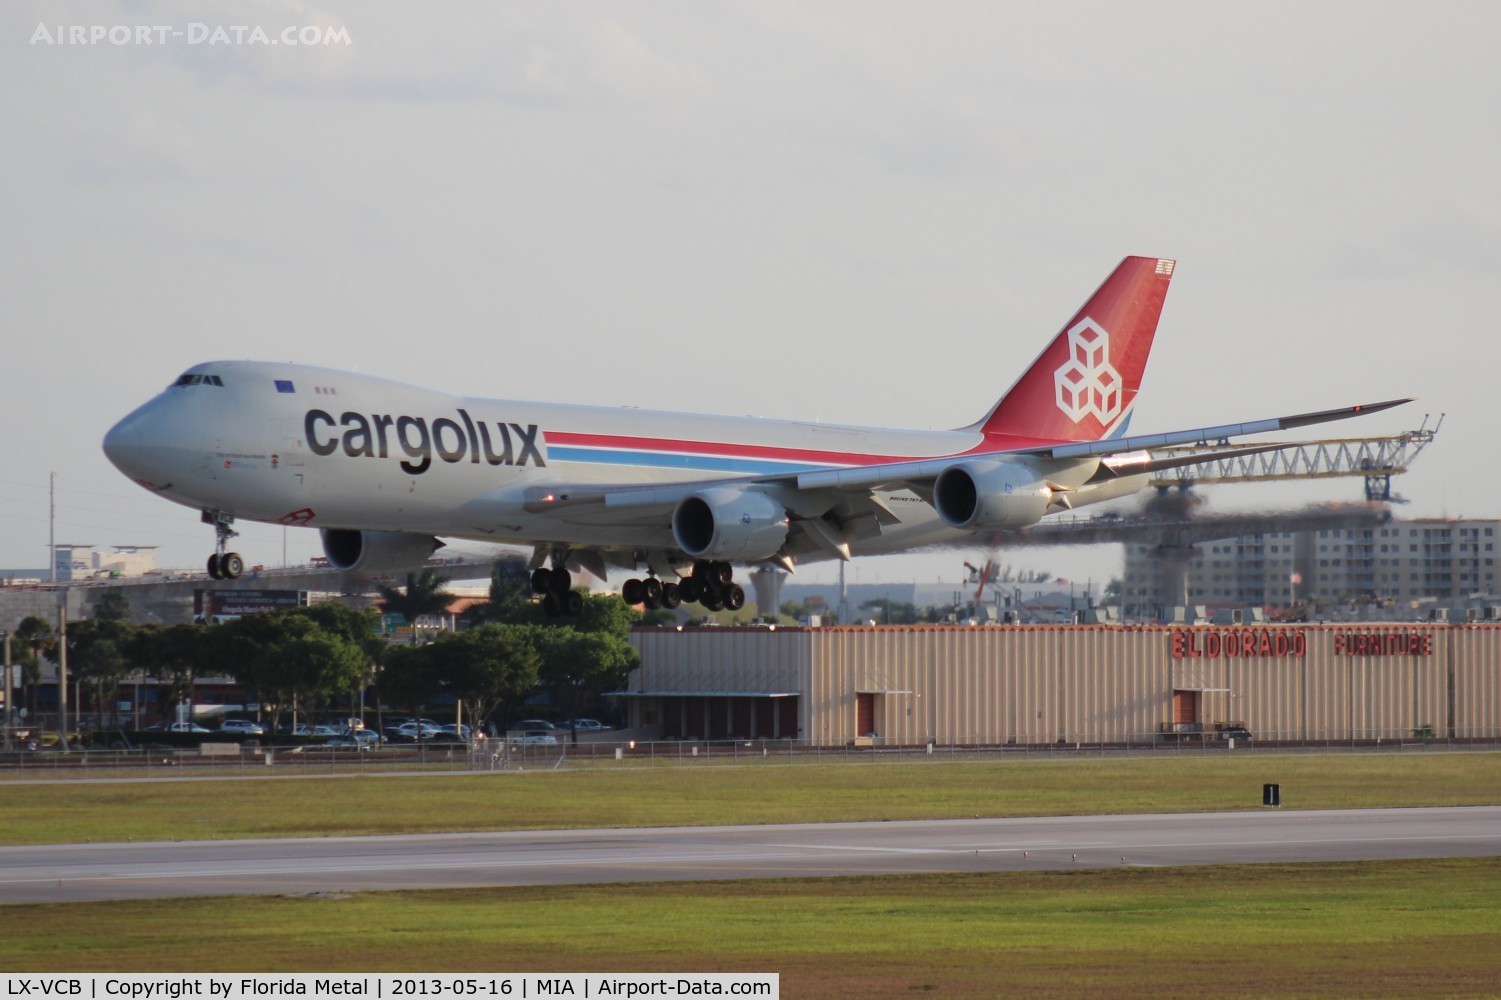 LX-VCB, 2010 Boeing 747-8R7F C/N 35806, Cargolux 747-800 with the famous El Dorado Furniture building in the background, where a majority of MIA arrival shots are taken from